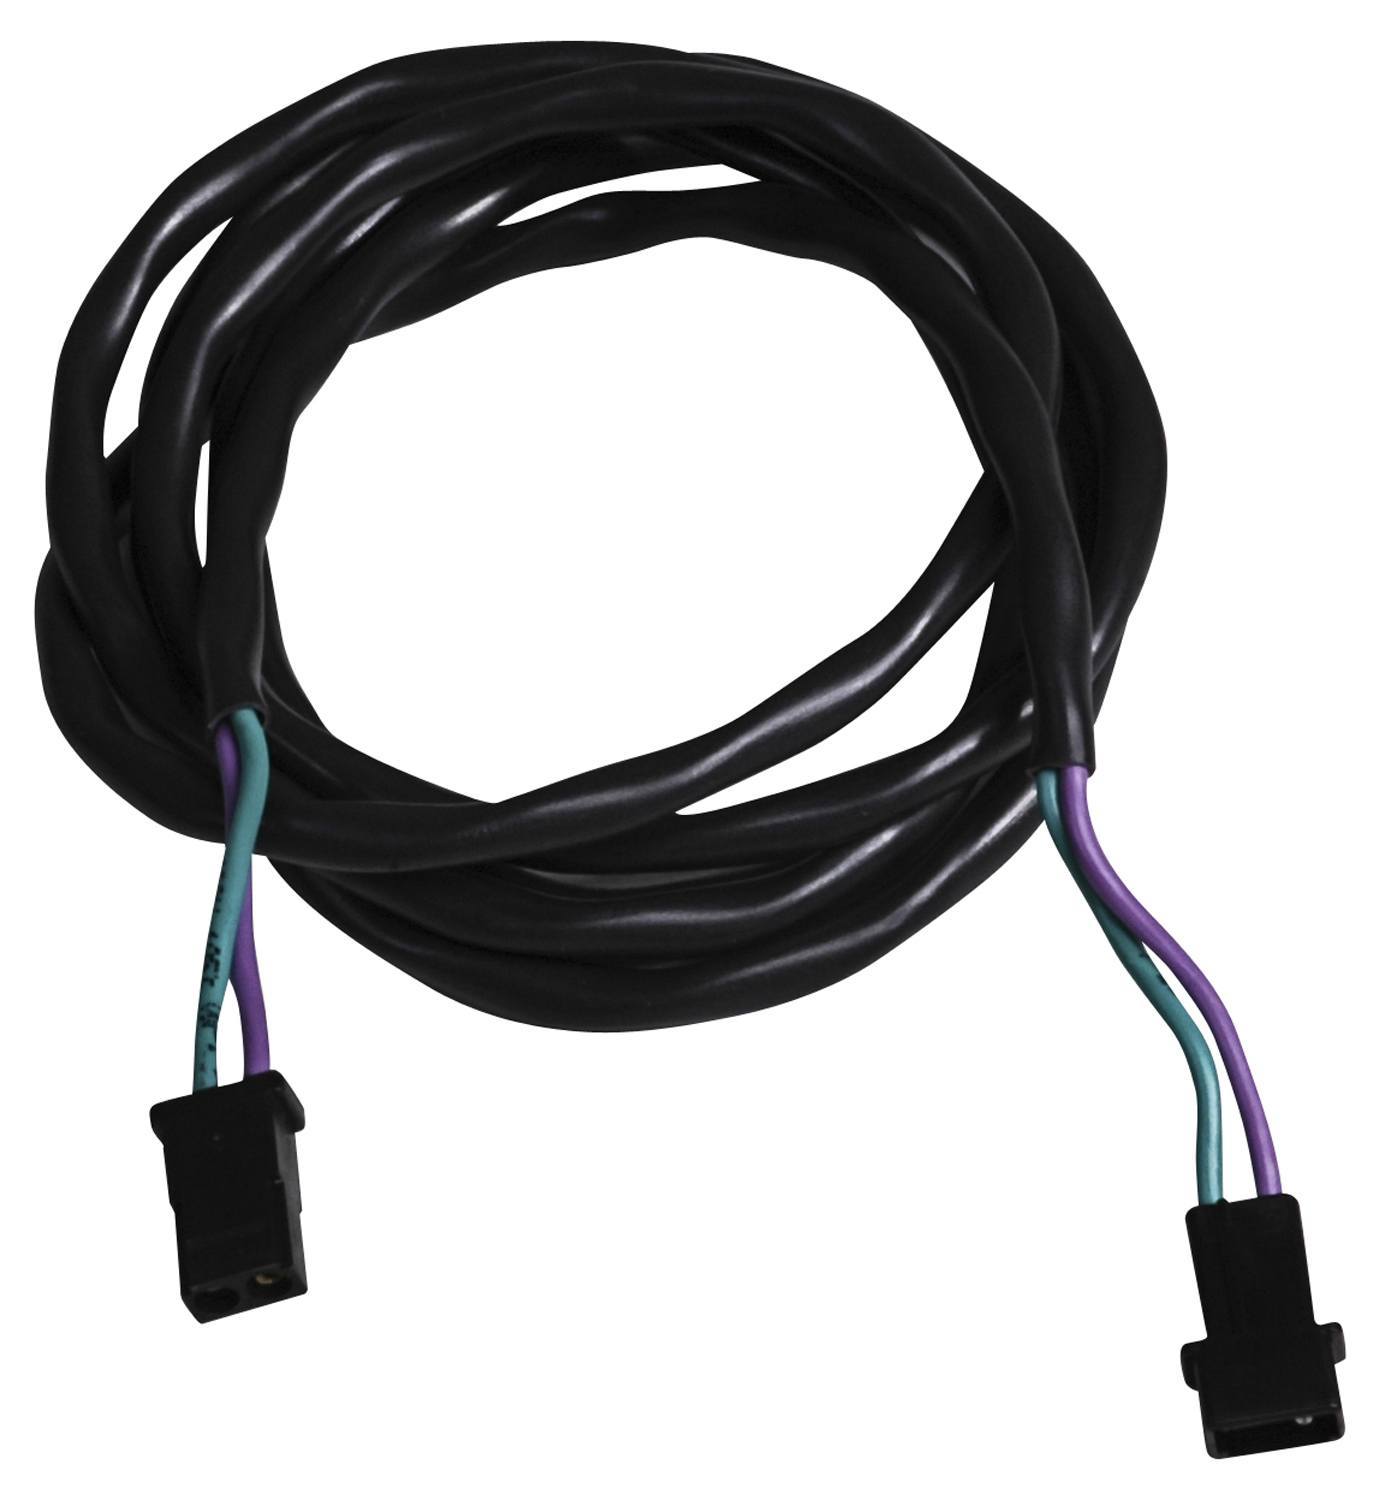 MSD Ignition 8860 Ignition Wiring Harness, 2 Pin Connectors, 6 ft, MSD 7 Ignition to Crank Trigger Magnetic Pickup, Each